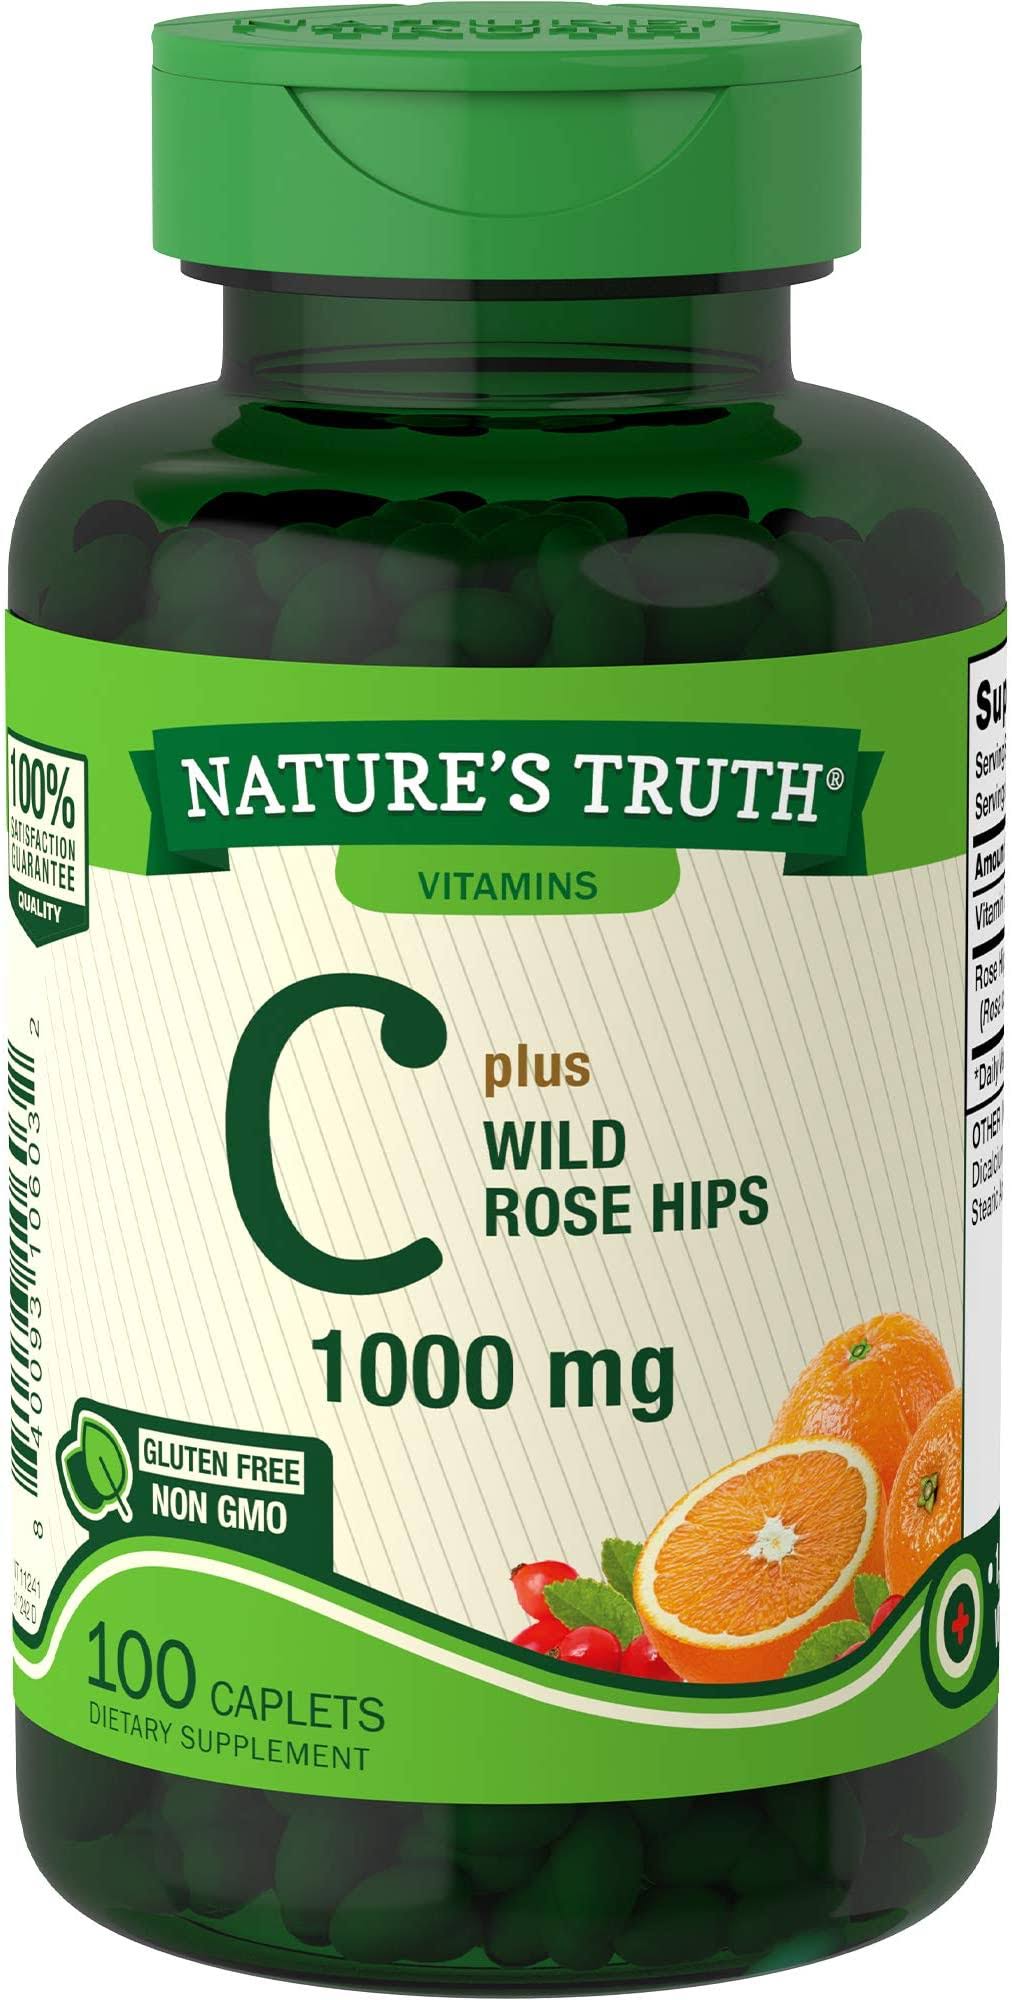 Nature's Truth Vitamin C 1000 mg, 100 Count